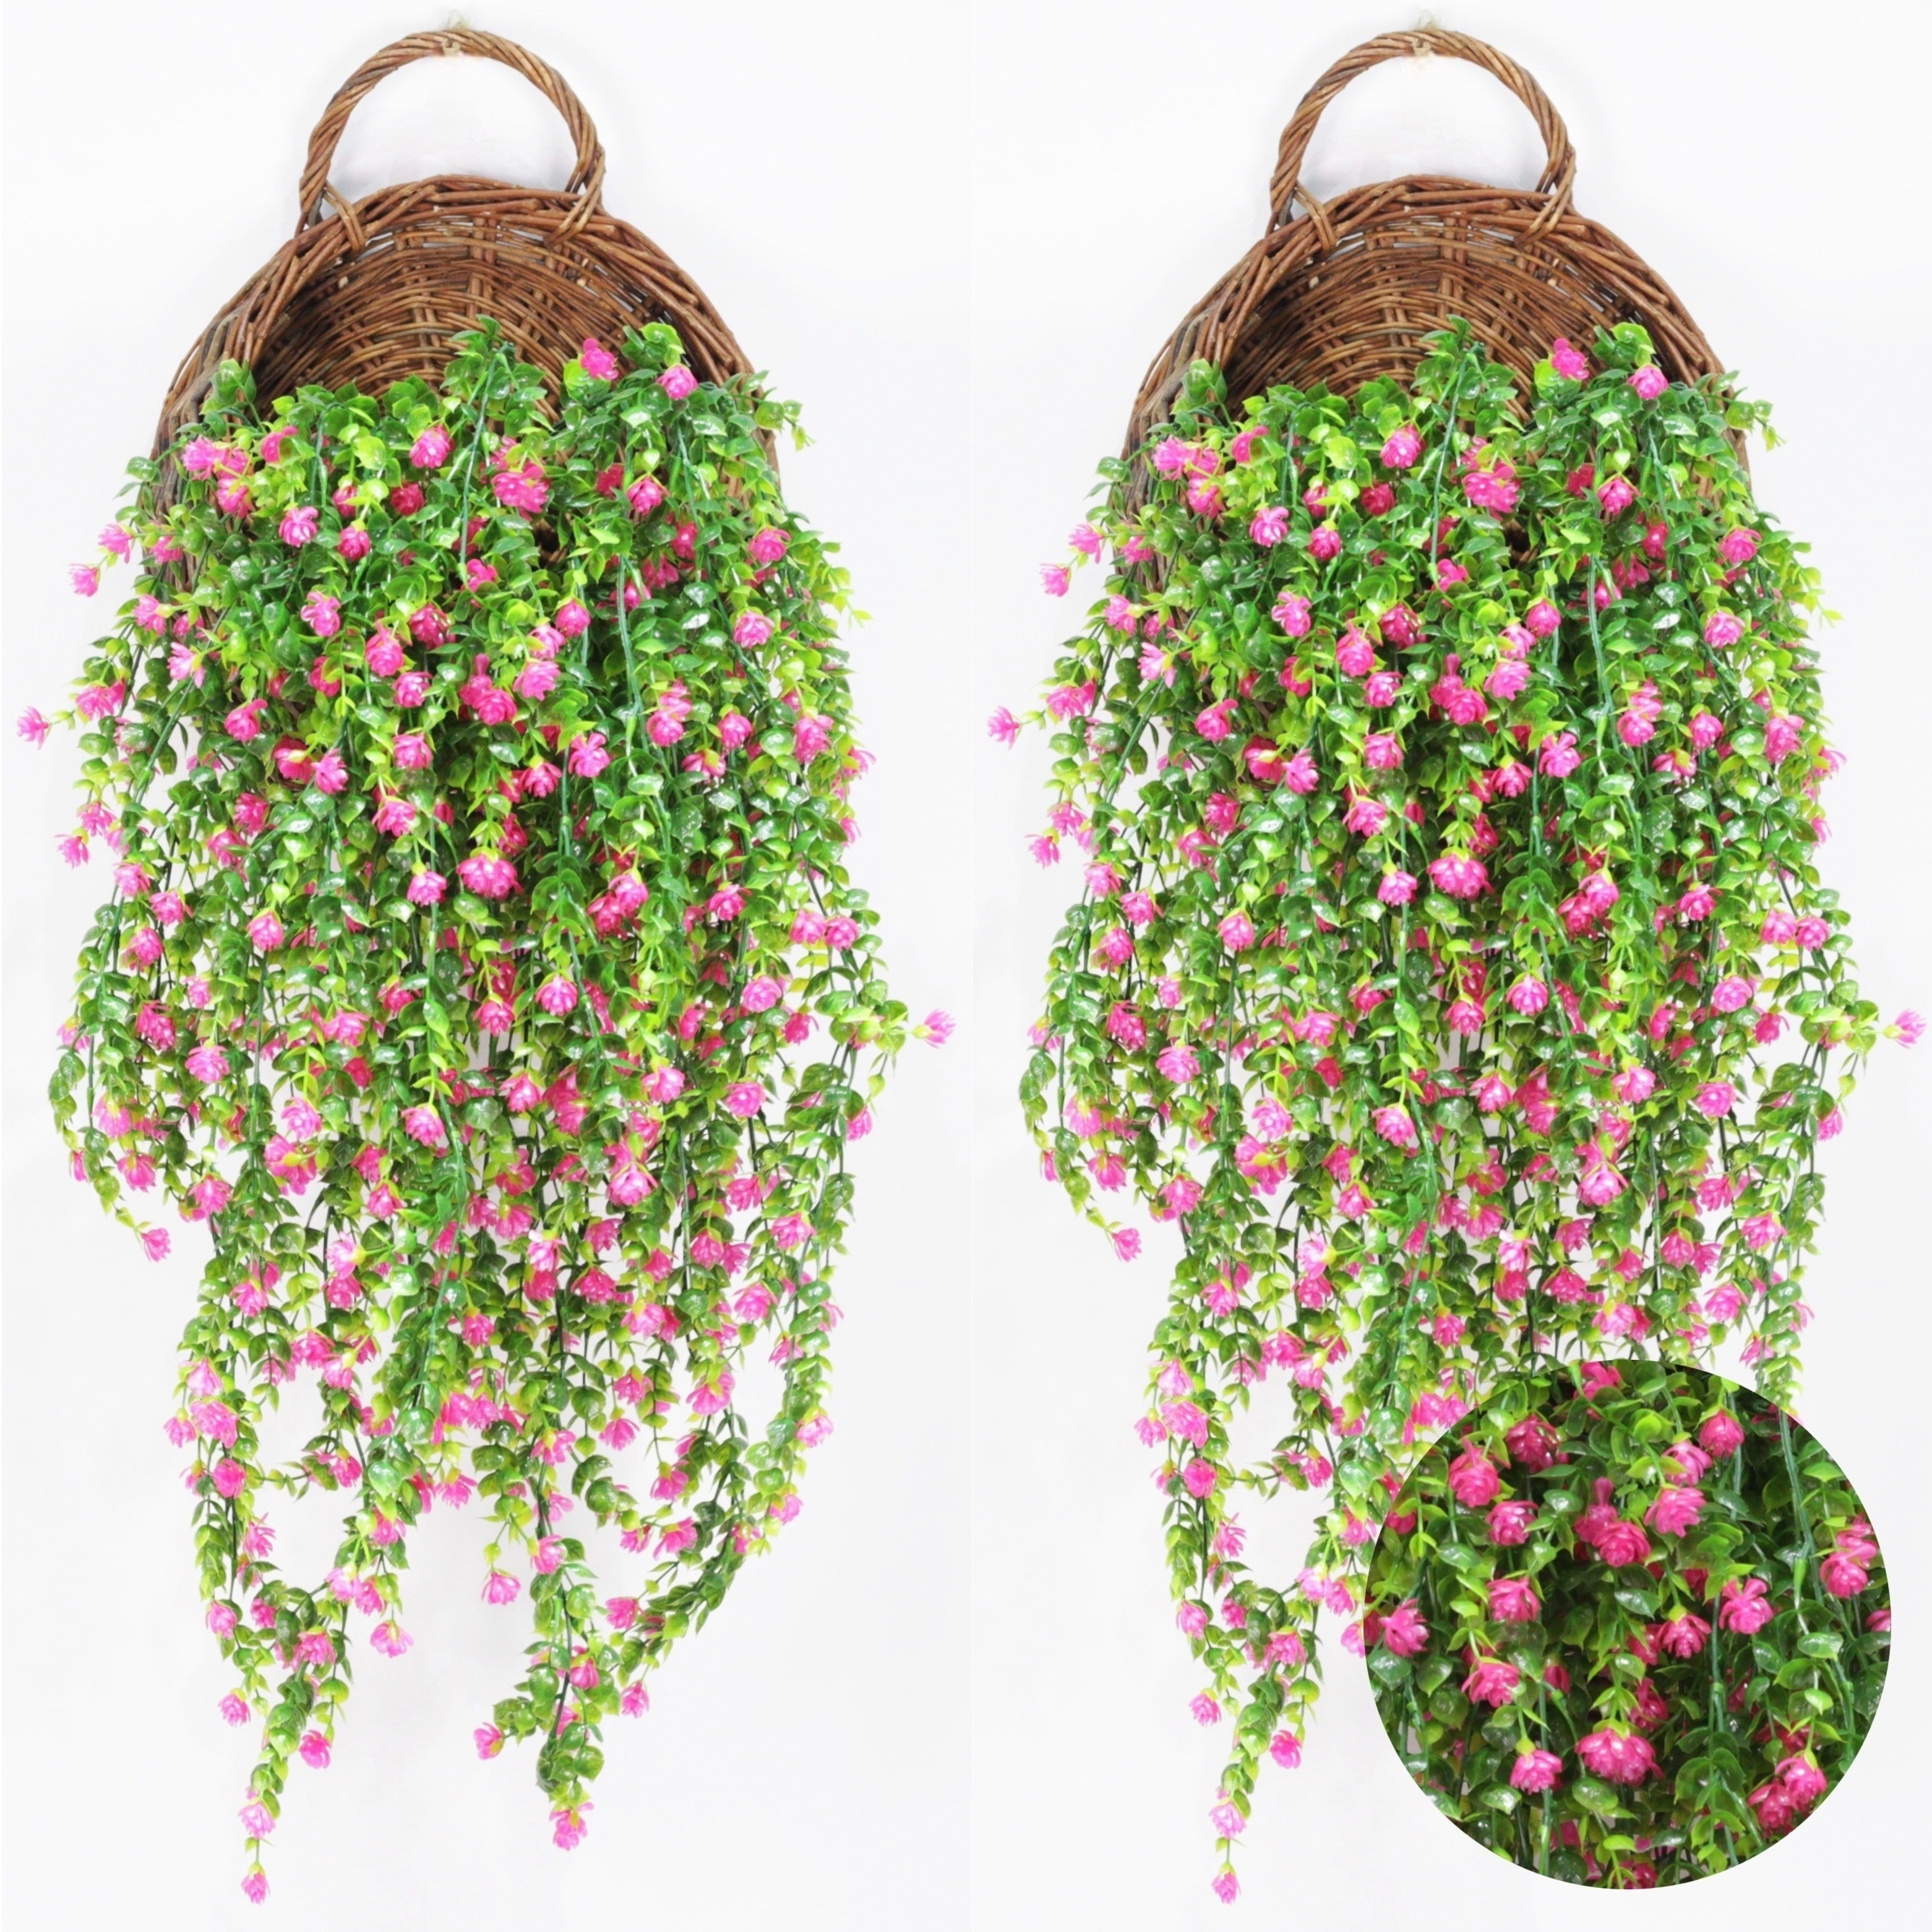 4pcs Artificial Hanging Plants Swags with Pink Flowers - Classic Style Plastic Greenery for Outdoor Decoration - UV Protected Fake Shrubs for Home, Garden, Porch, Indoor/Outdoor Use - No Electricity Required - Suitable for Hanukkah, Thanksgiving, St. Patrick's Day, Valentine's Day, Ramadan Decor